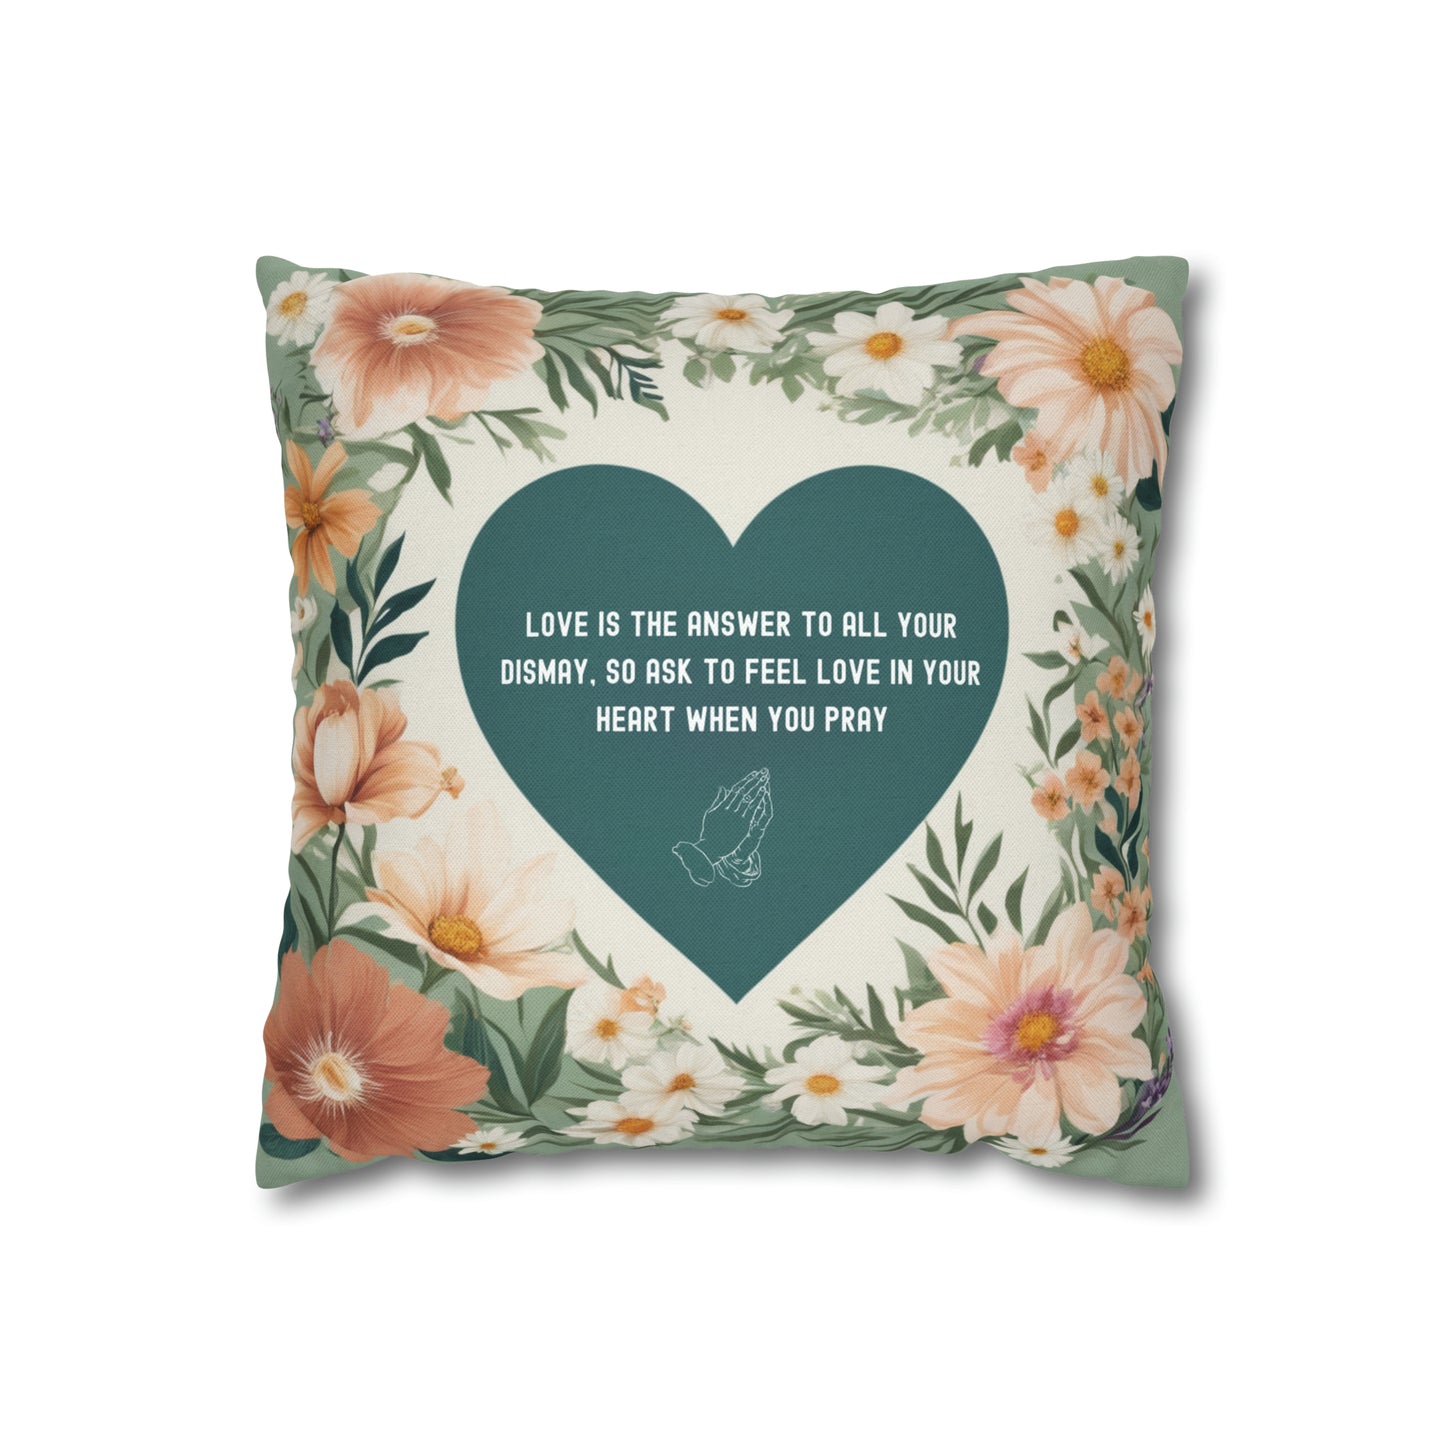 Ask to Feel Love PIllow